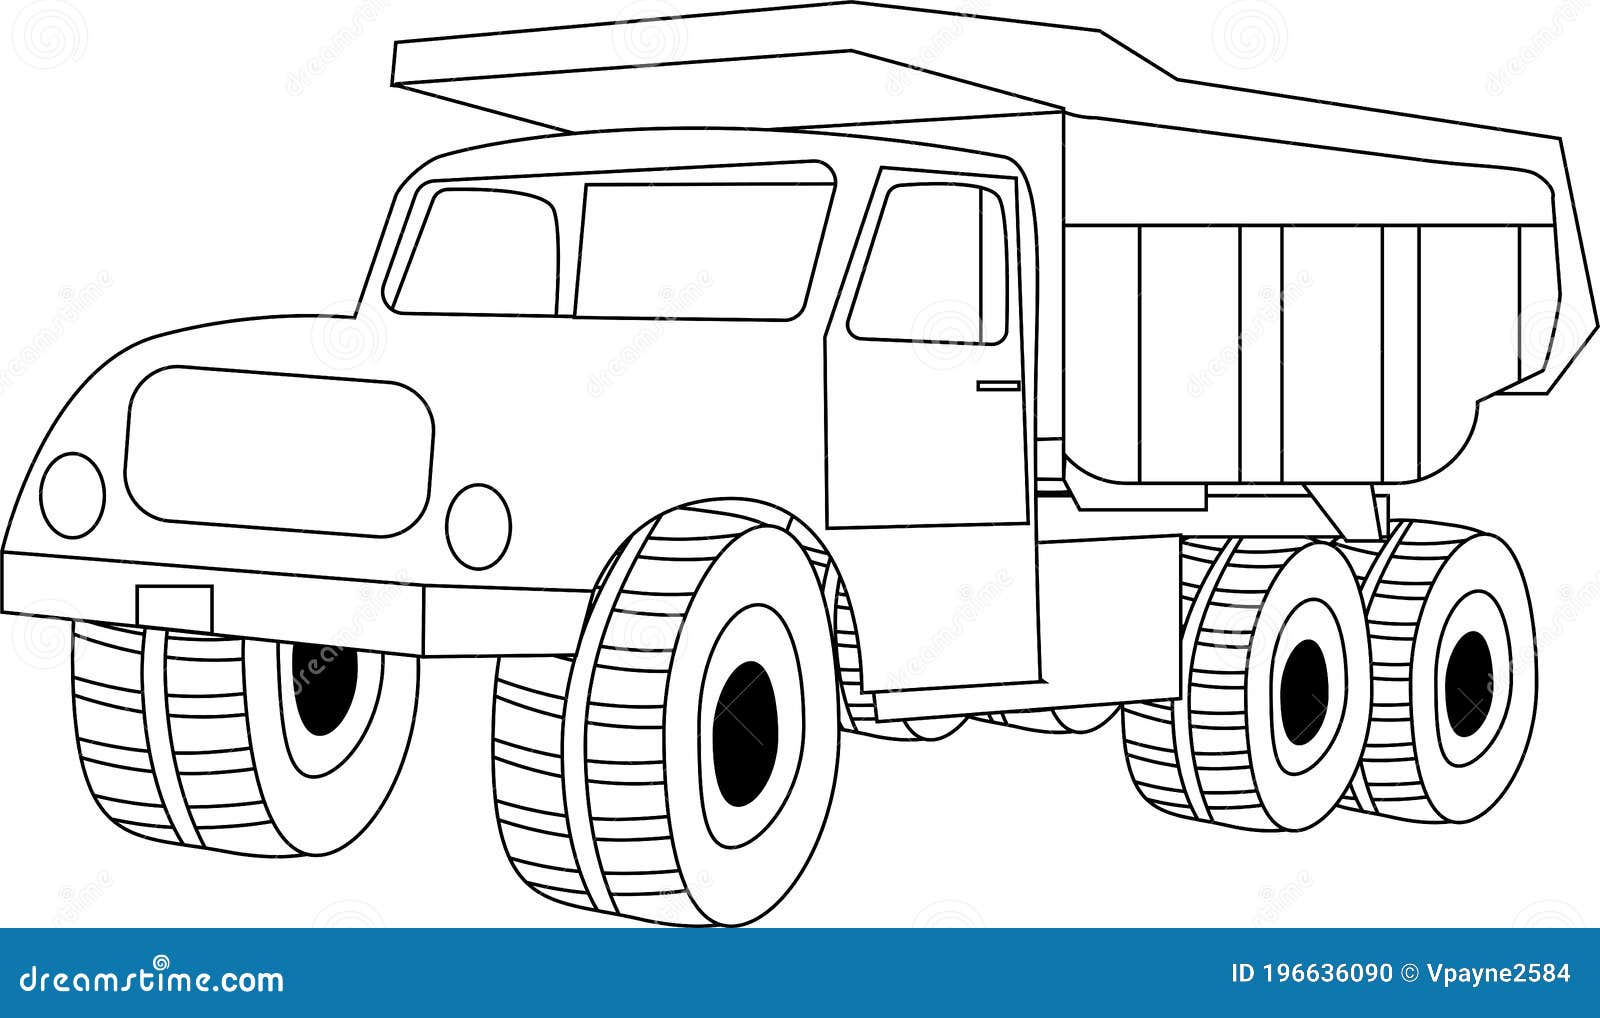 Dump Truck Coloring Page Outline For Kids. Stock Vector